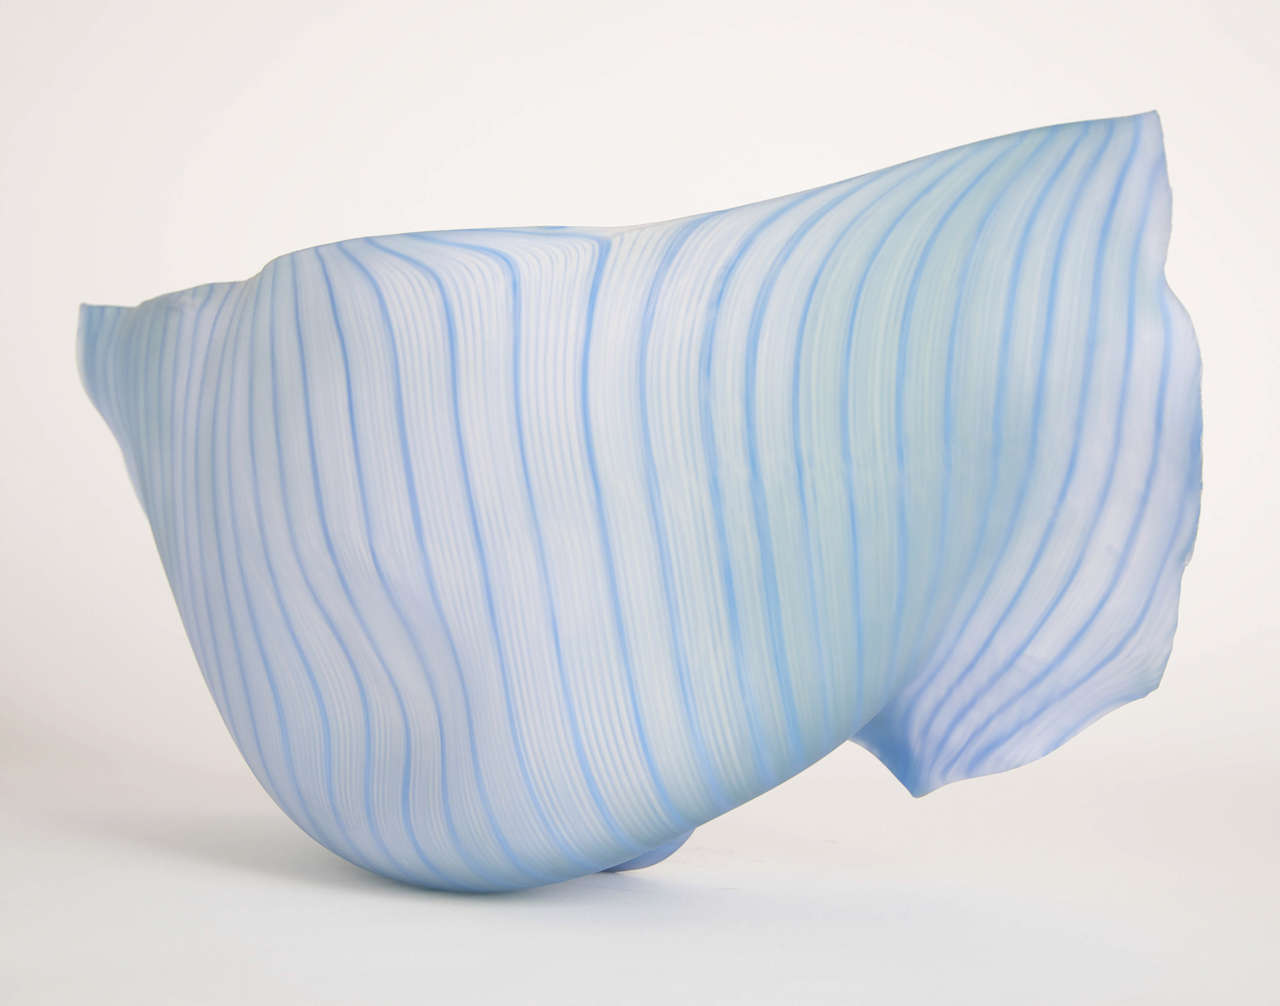 The large sculpture in pale blue color with white filigrana is one of the finest examples of large-scale free-form blown studio glass. Unique piece by Jeremy Maxwell Wintrebert.

The first time Wintrebert saw hot glass moving at the end of a blow